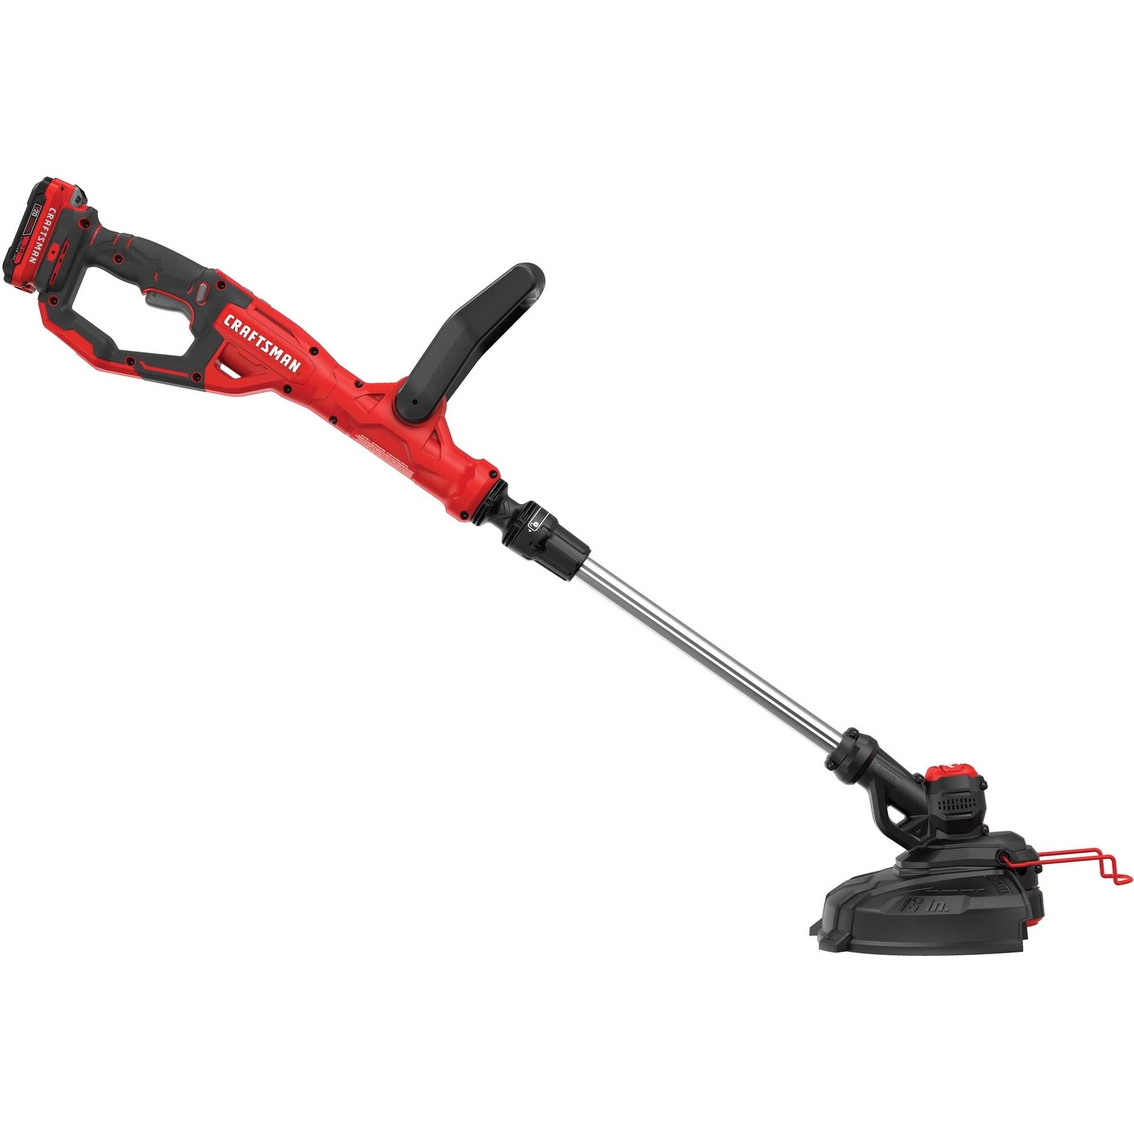 Craftsman V20* Cordless 13 in. String Trimmer/Edger with Automatic Feed Kit - Image 2 of 4